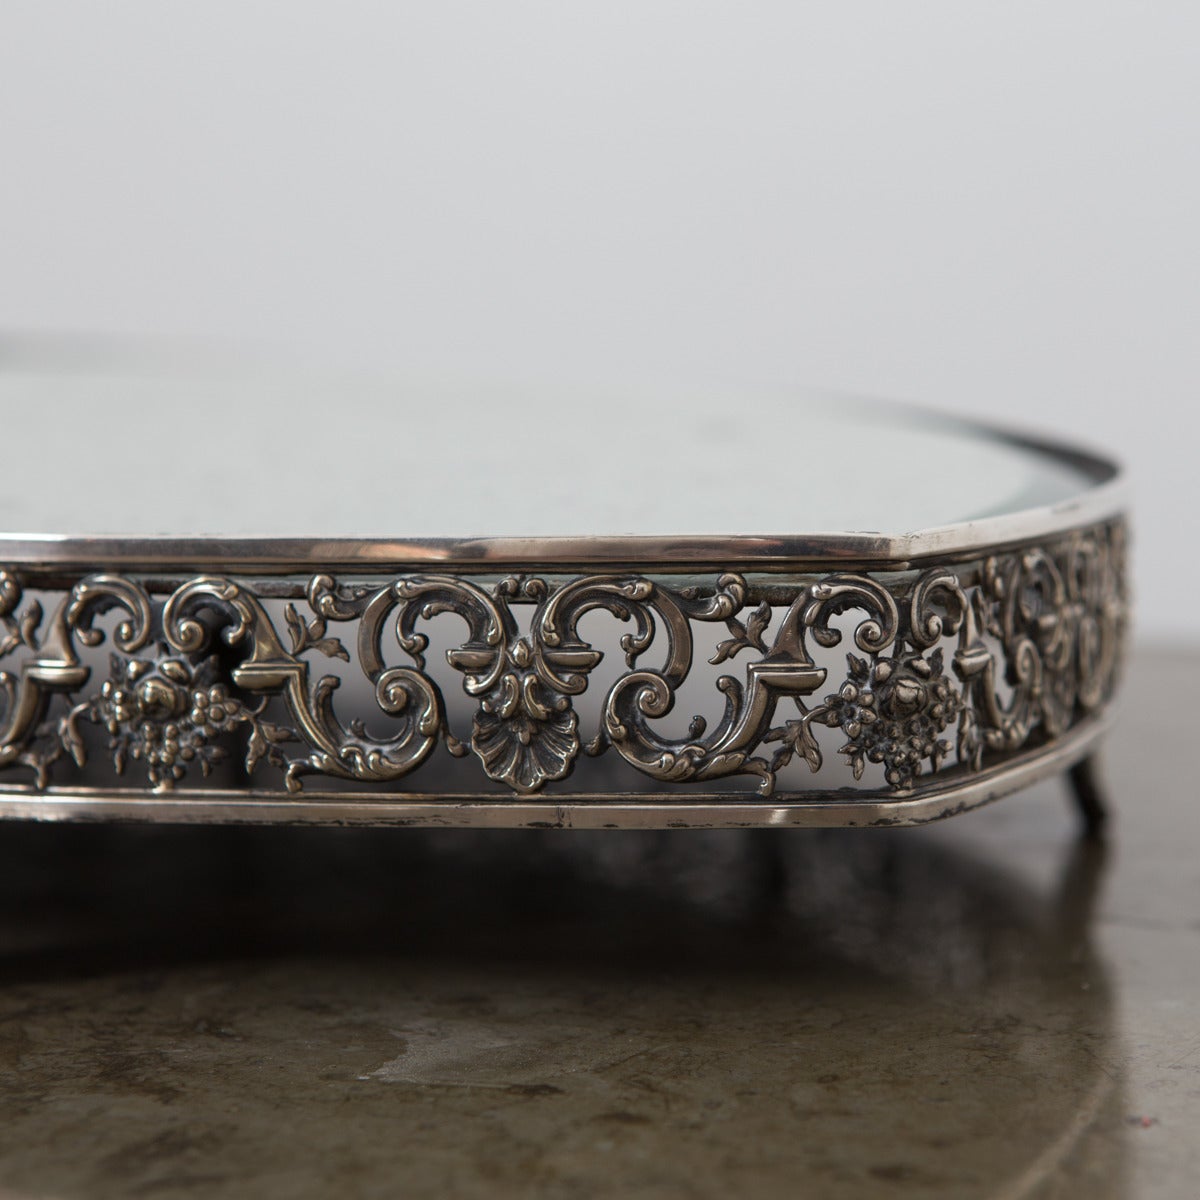 A almond shaped centre piece from France made during the Empire period early 19th Century. Made in silver plate. Frieze decorated with leaves and flowers. Feet in shape of leaves significant for the Empire period.